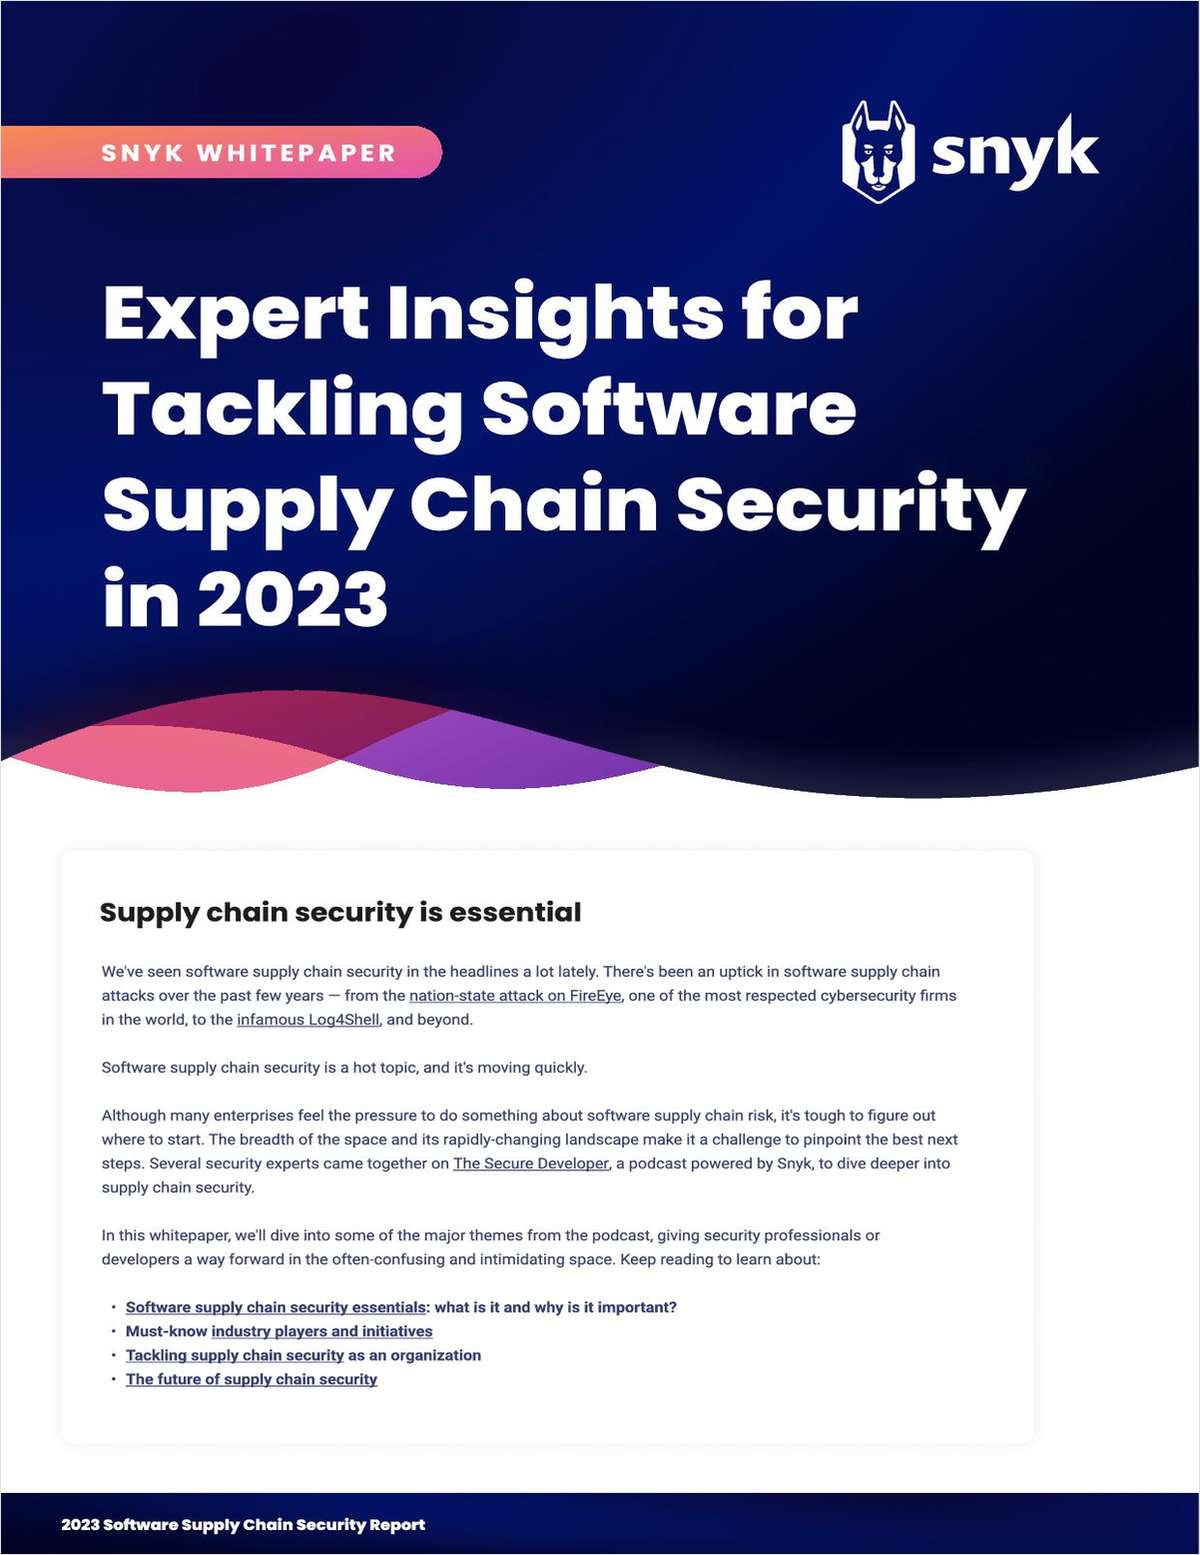 Expert Insights for Tackling Software Supply Chain Security in 2023